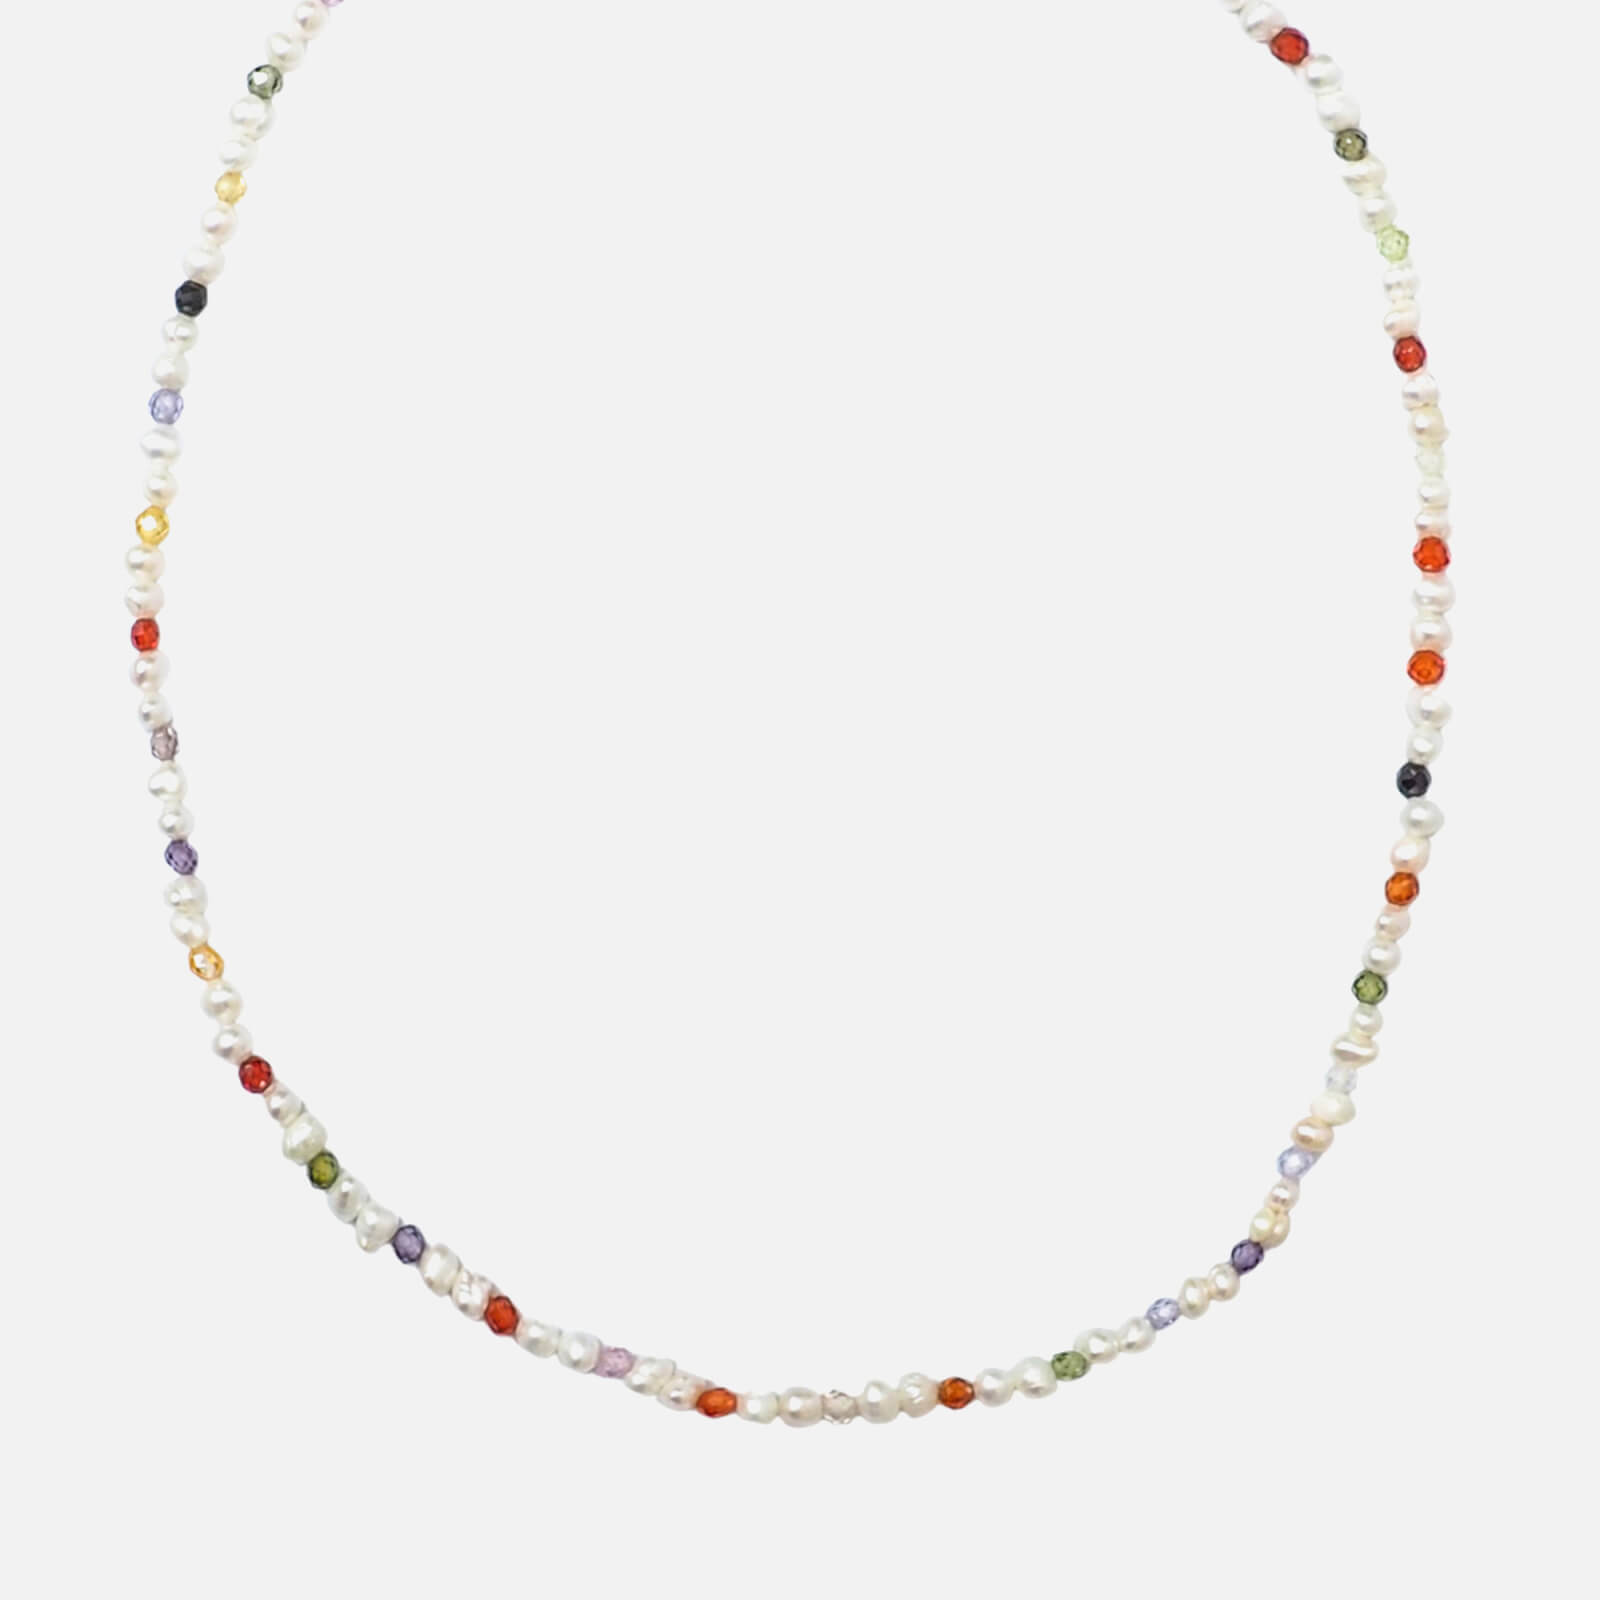 Hermina Athens Women's Pearls And Rainbows Necklace - Multi